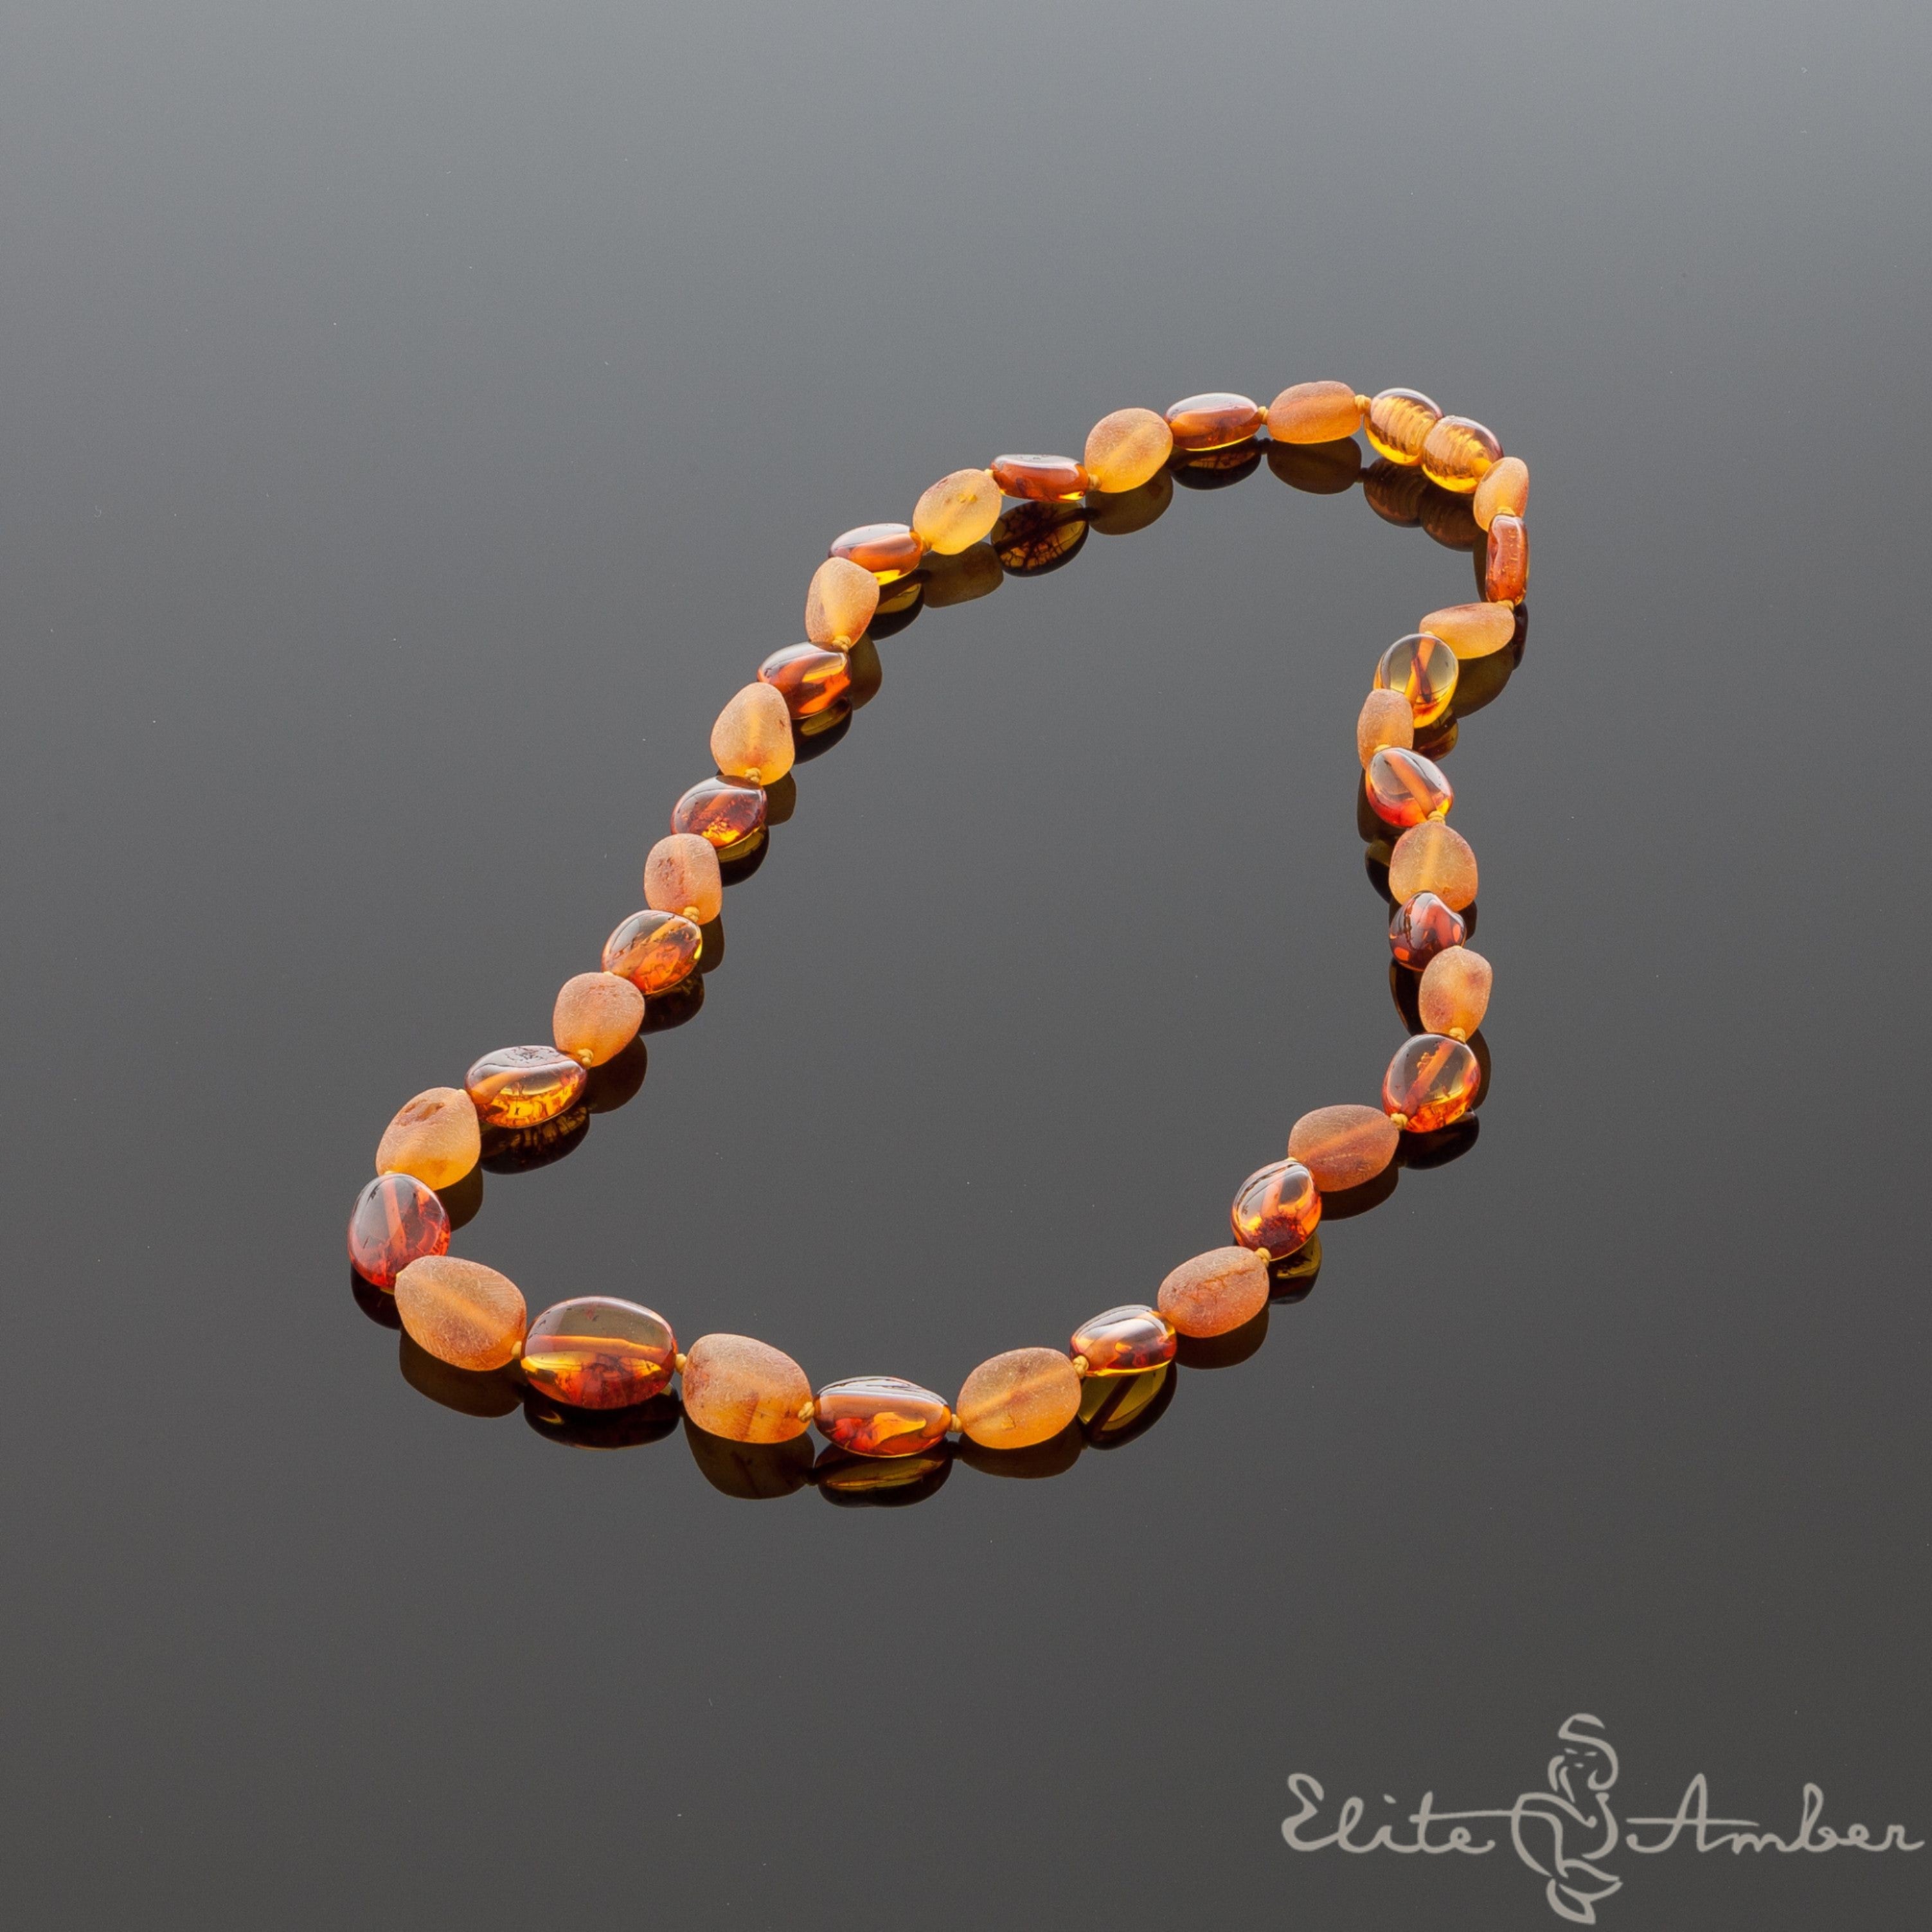 Amber necklace "Polished and raw amber pebbles"